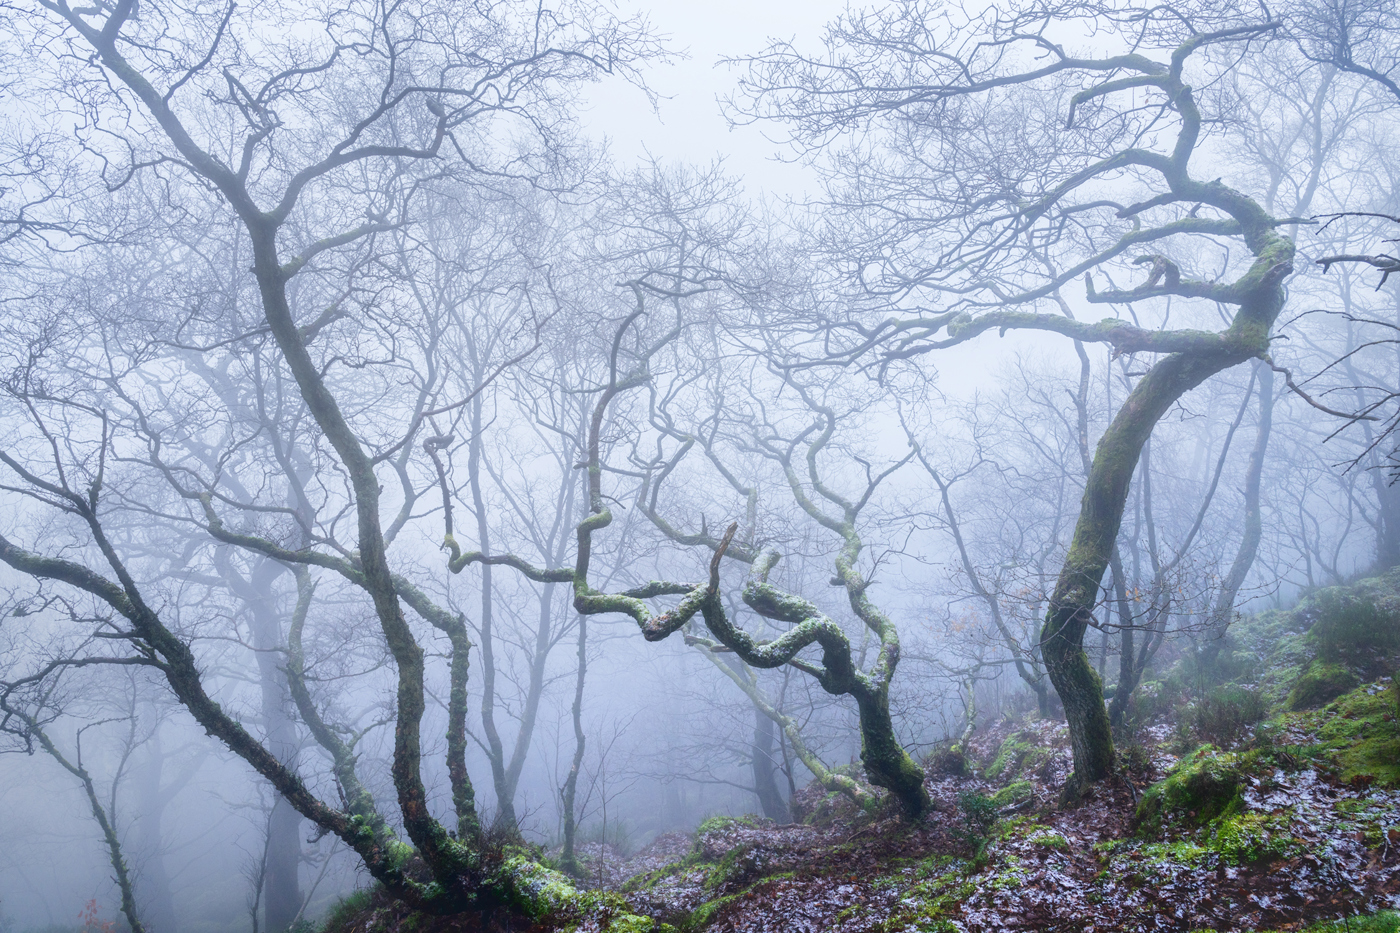 An ethereal North Yorkshire woodland. Twisted, bare branches reach out like dancers frozen in time, shrouded in a delicate mist. A gentle dusting of snow clings to the woodland floor, enhancing the scene's serene, otherworldly quality.